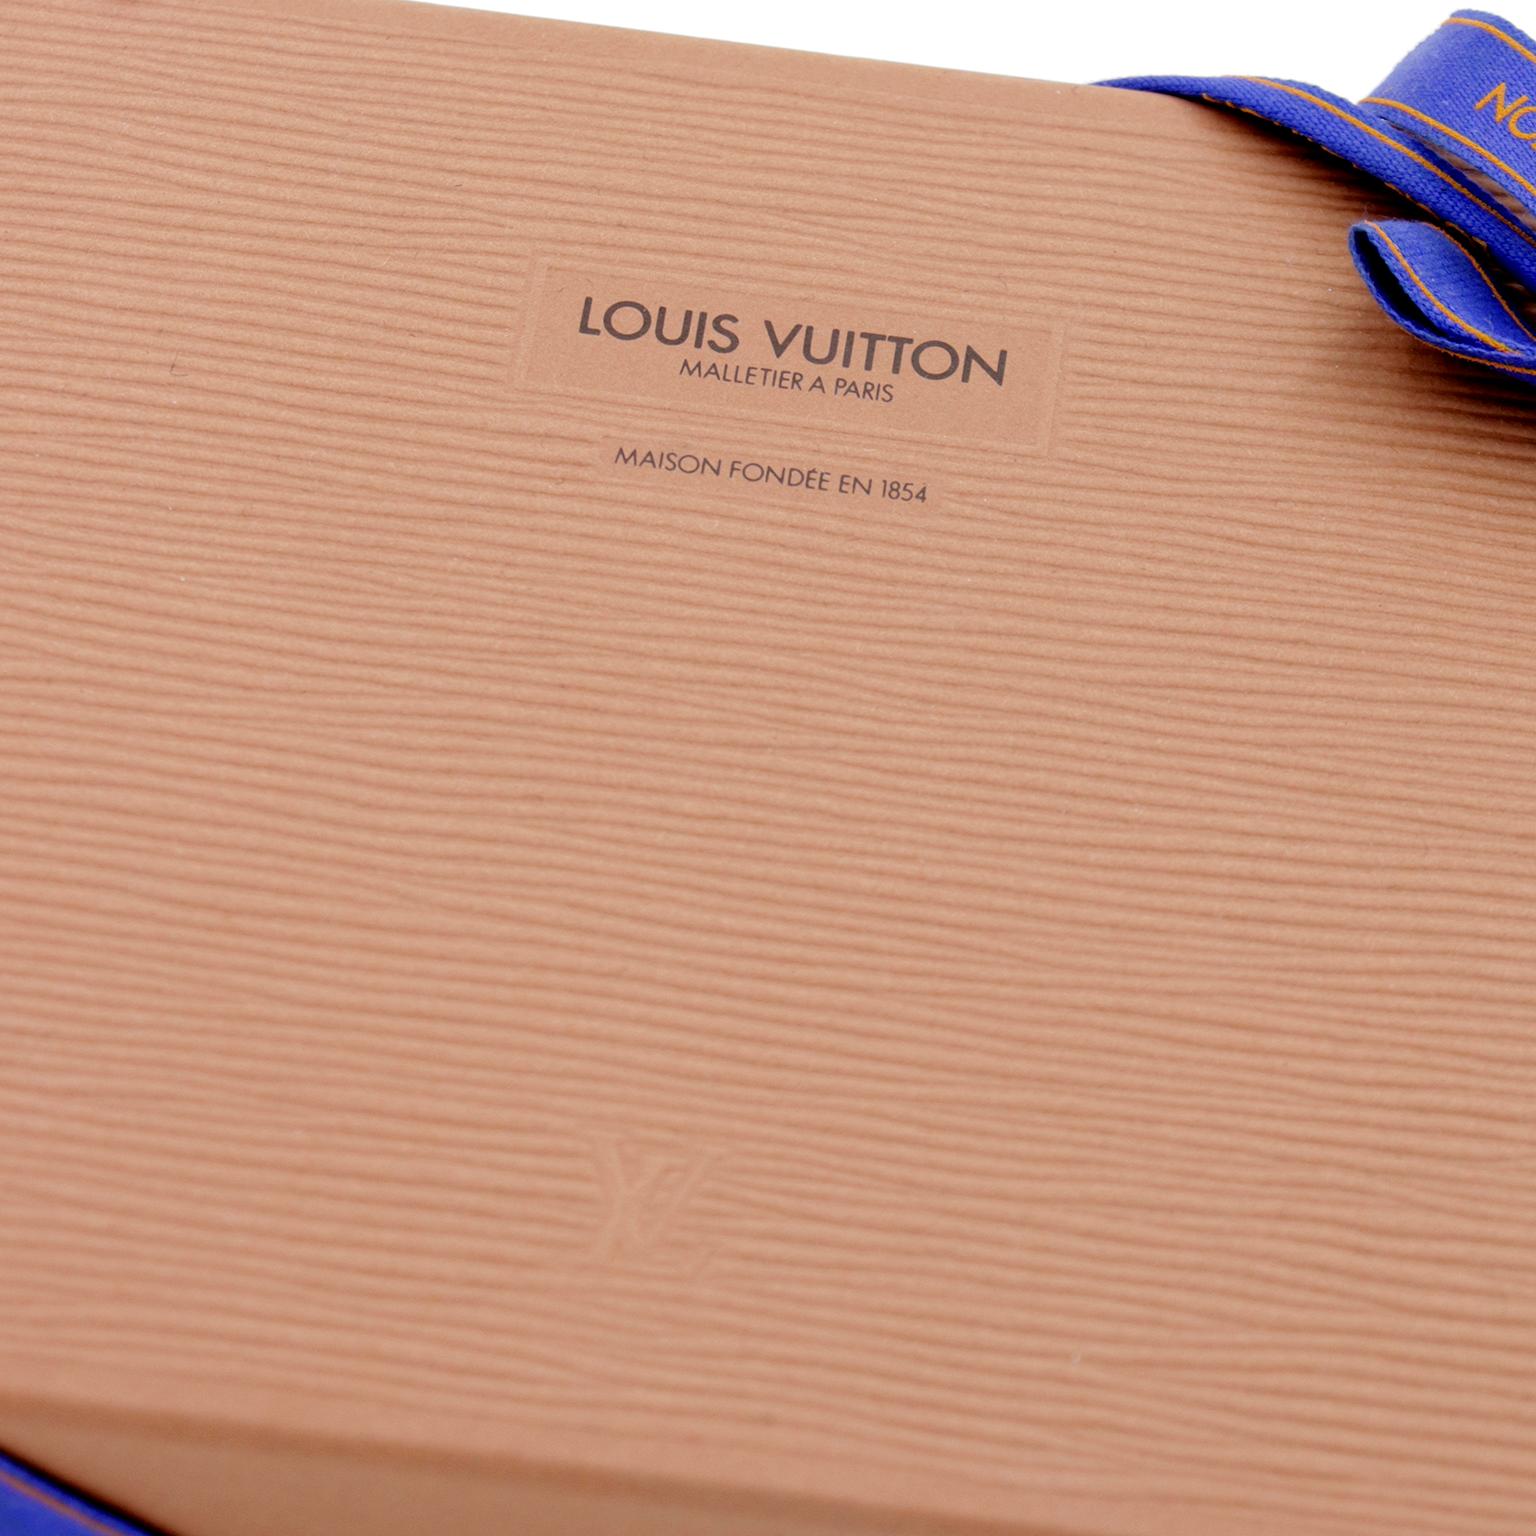 Louis Vuitton Cup 2000 Red & Blue Silk Scarf Unused in Original Box For Sale 4